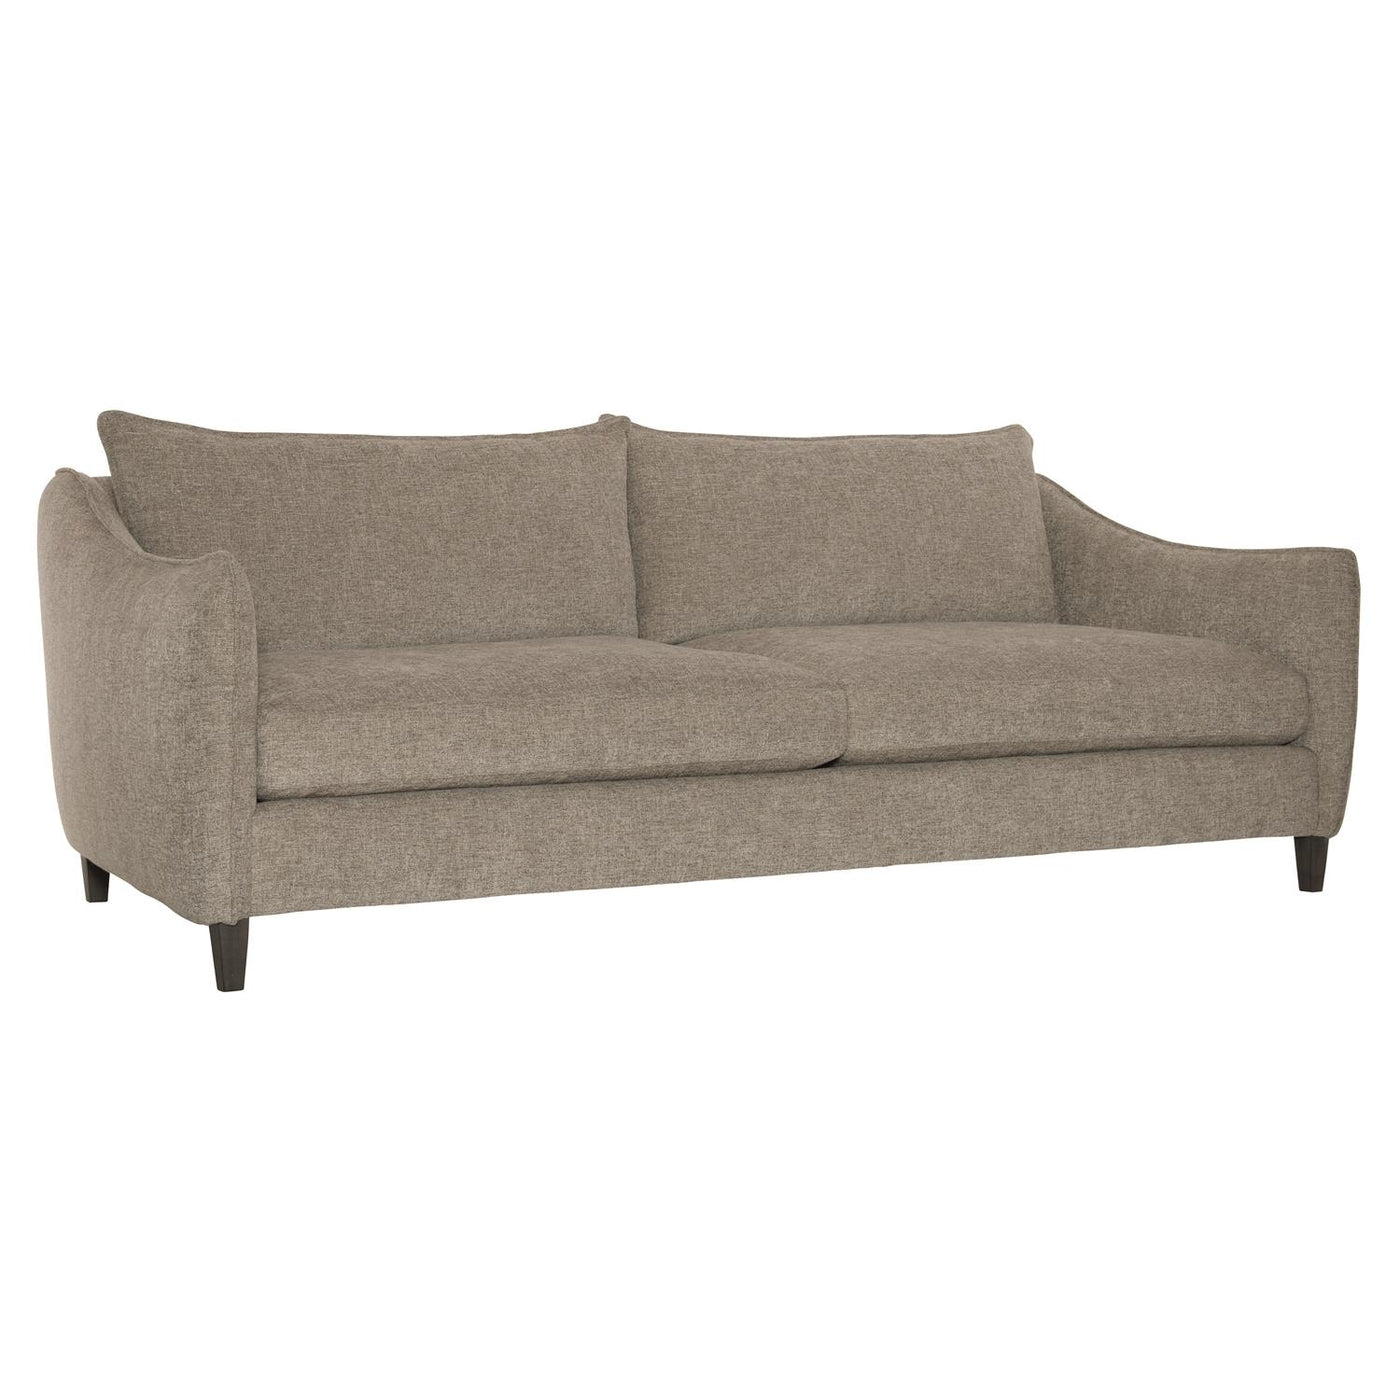 SOFA UPHOLSTERED 2-OVER-2 CURVED ARMS